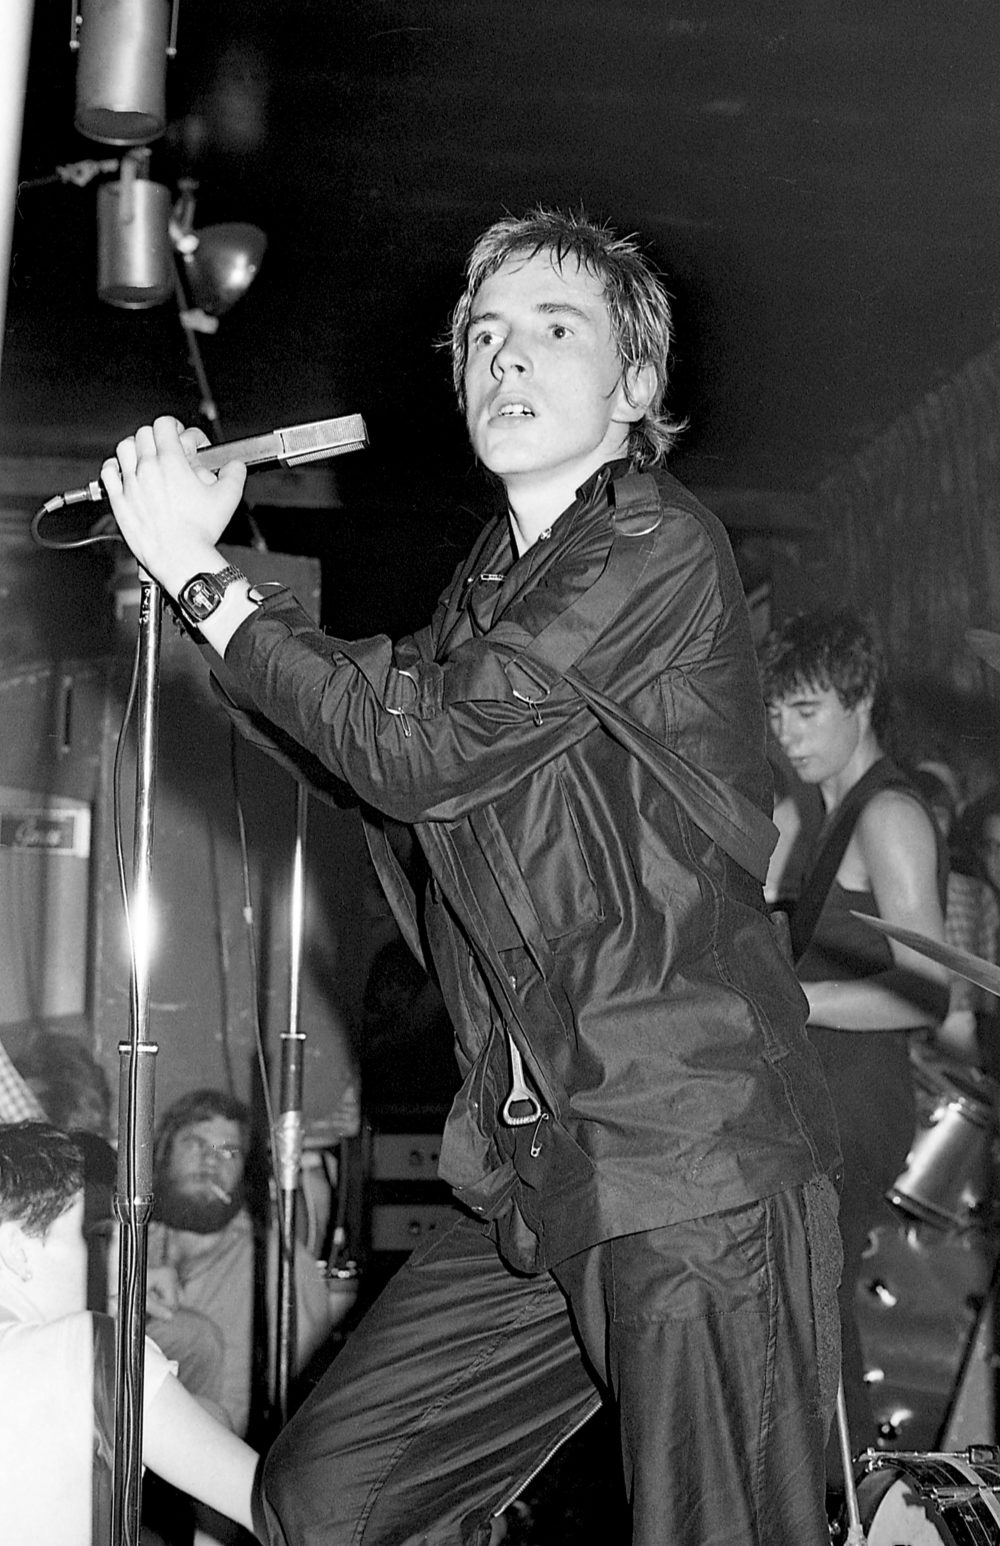 ohn Lydon performing with The Sex Pistols at the 100 Club Punk Special (1976) by Barry Plummer.